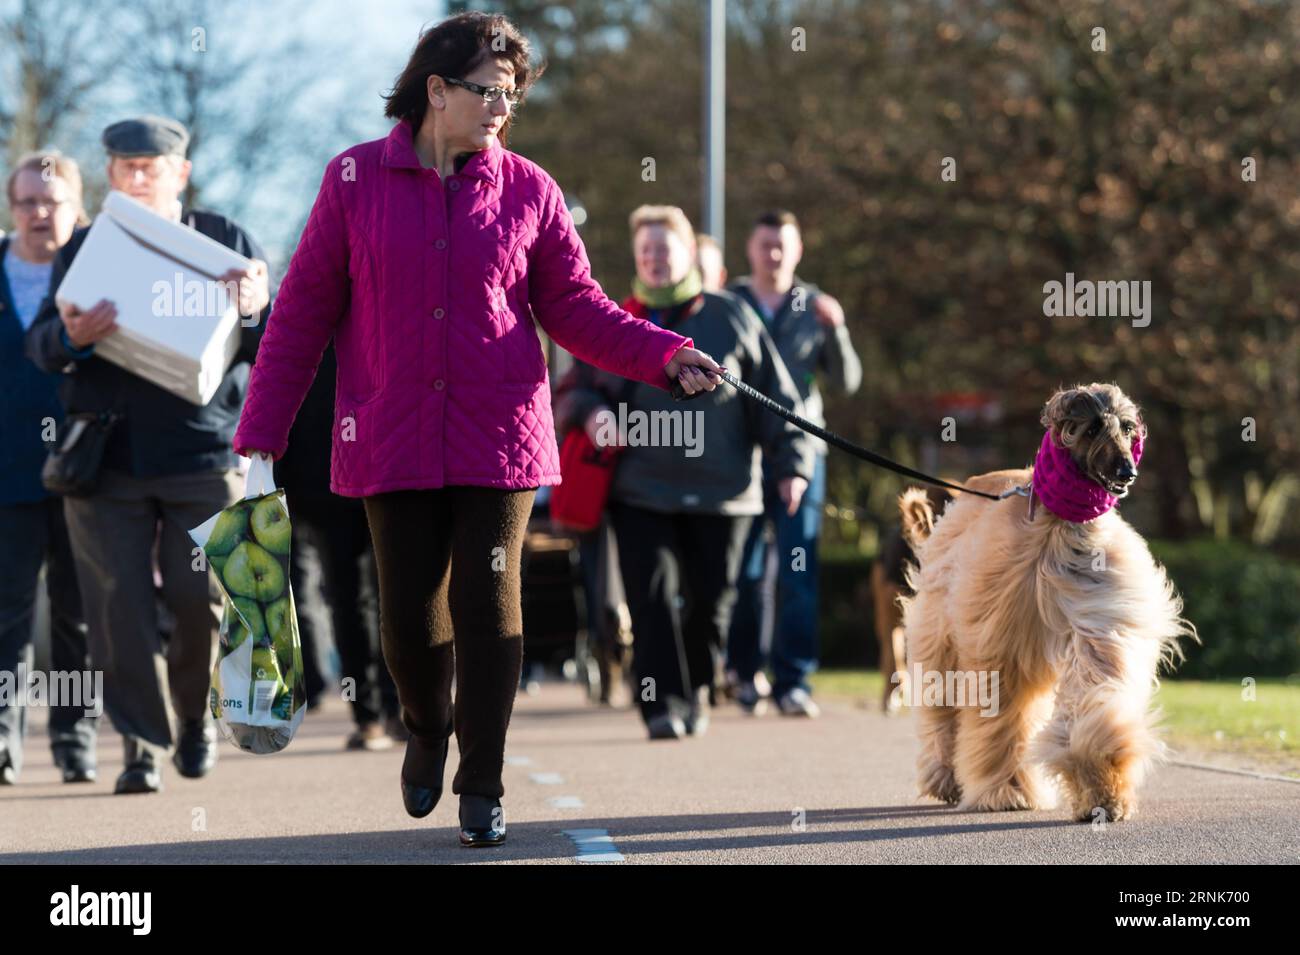 (170309) -- BIRMINGHAM (BRITAIN), March 9, 2017 -- A dog and its owner arrive for the annual Crufts dog show in Birmingham, Britain, on March 9, 2017. ) BRITAIN-BIRMINGHAM-CRUFTS DOG SHOW RayxTang PUBLICATIONxNOTxINxCHN   Birmingham Britain March 9 2017 a Dog and its Owner Arrive for The Annual Crufts Dog Show in Birmingham Britain ON March 9 2017 Britain Birmingham Crufts Dog Show RayxTang PUBLICATIONxNOTxINxCHN Stock Photo